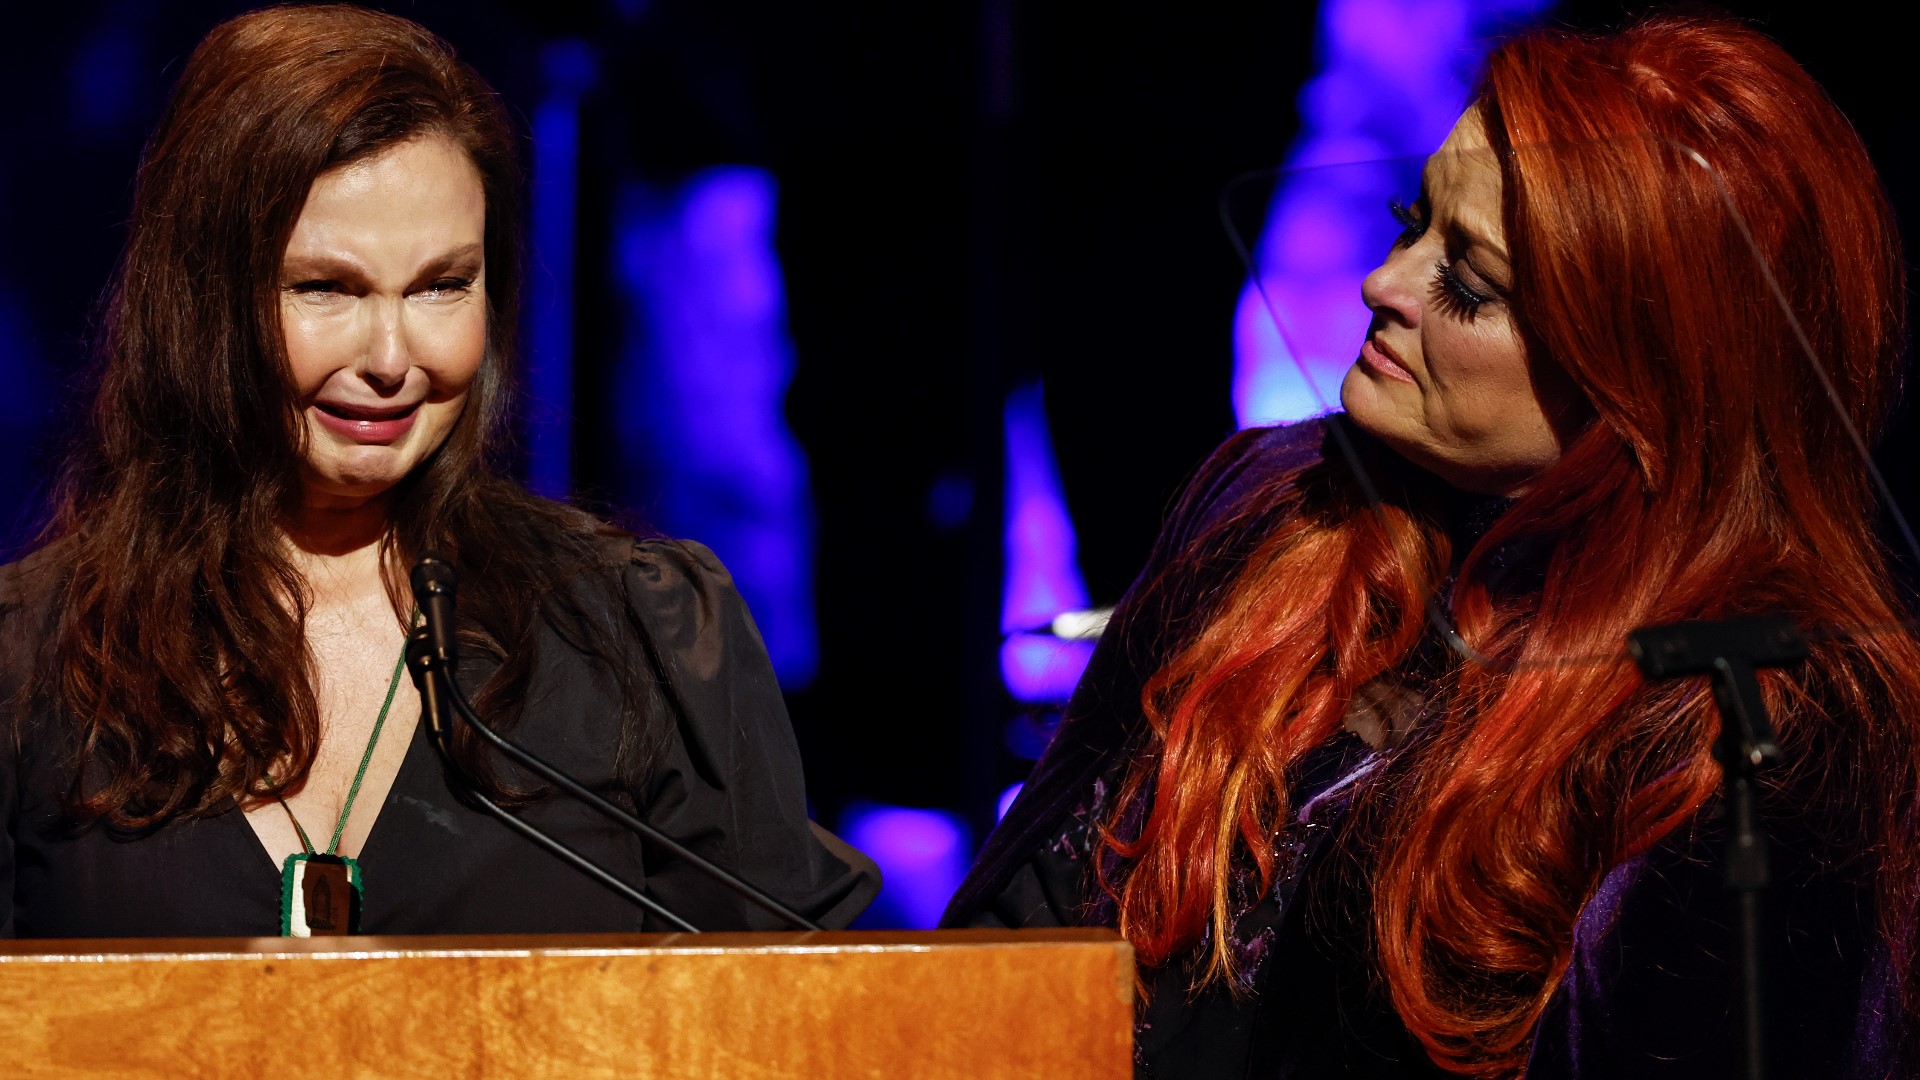 The Judds joined the Country Music Hall of Fame on Sunday in a ceremony filled with tears, music and laughter, just a day after Naomi Judd died unexpectedly.